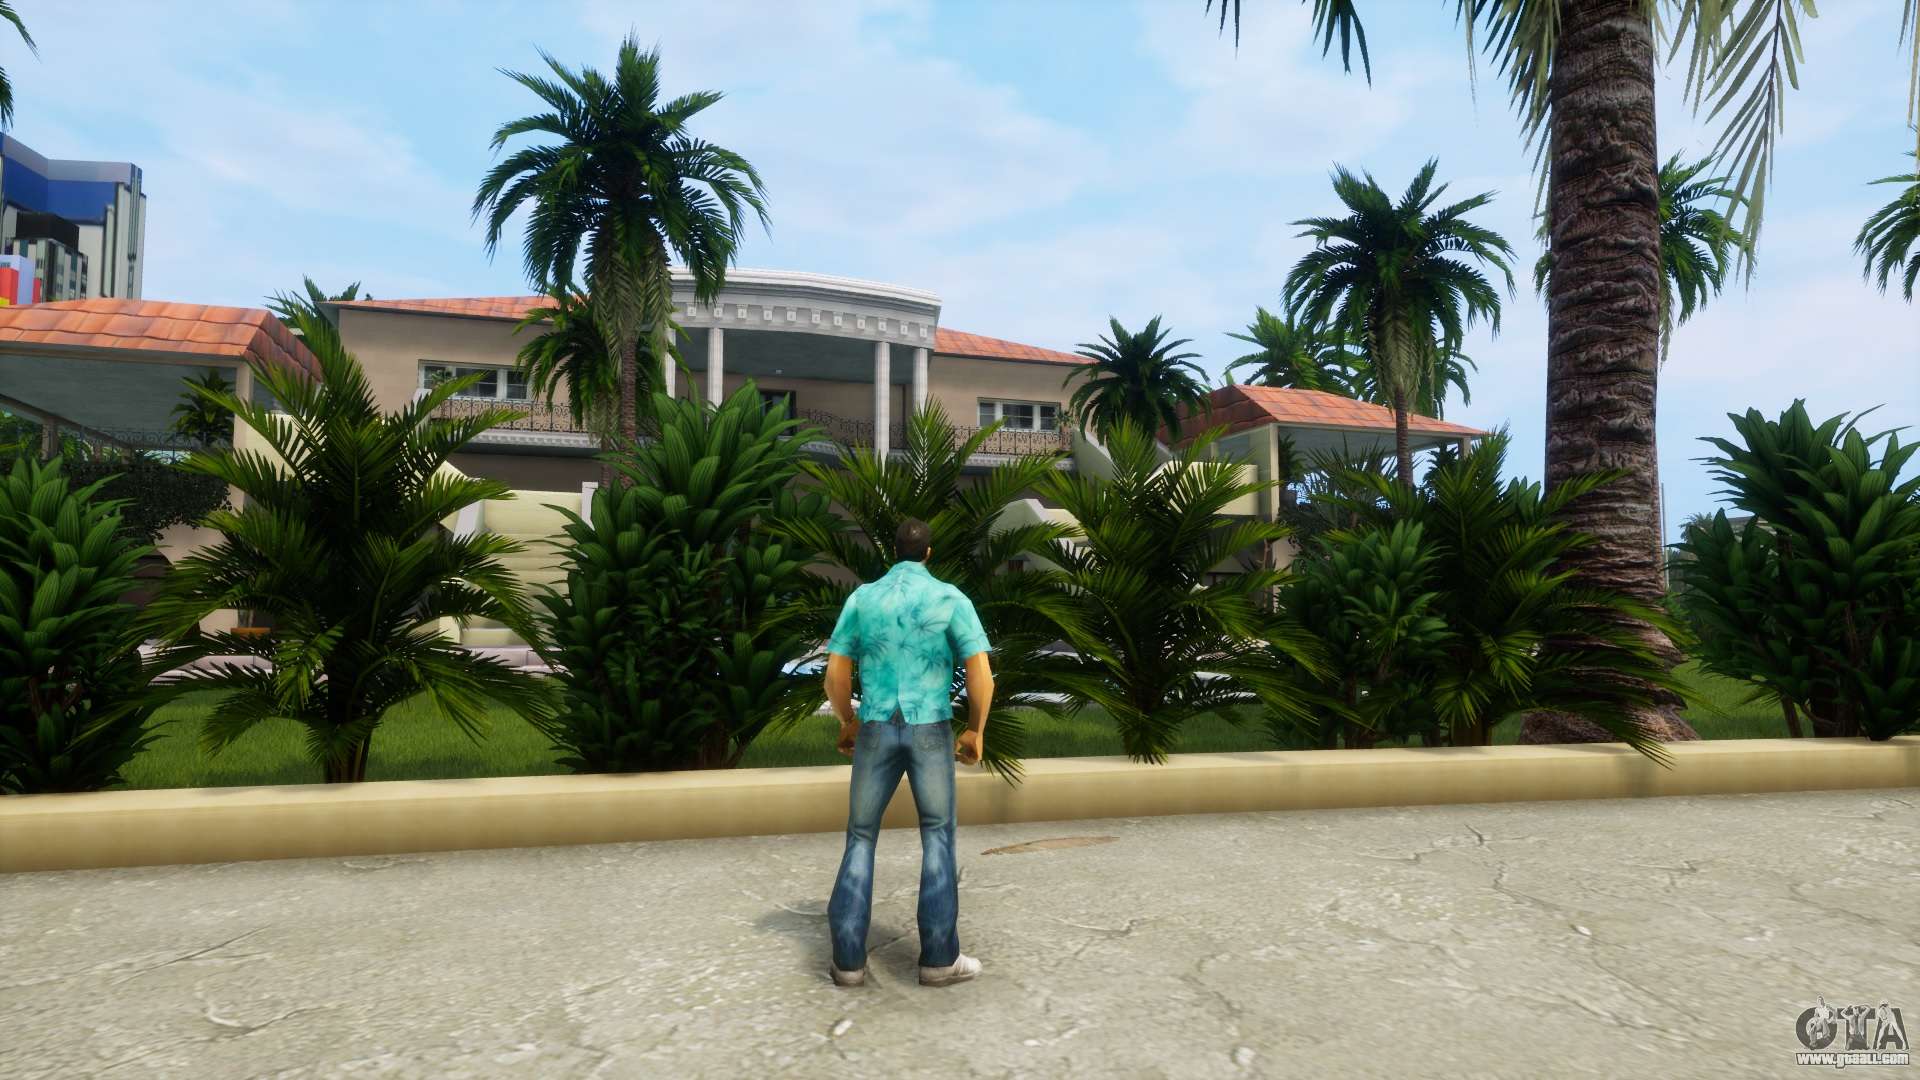 Classic Tommy model with HD textures for GTA Vice City Definitive Edition